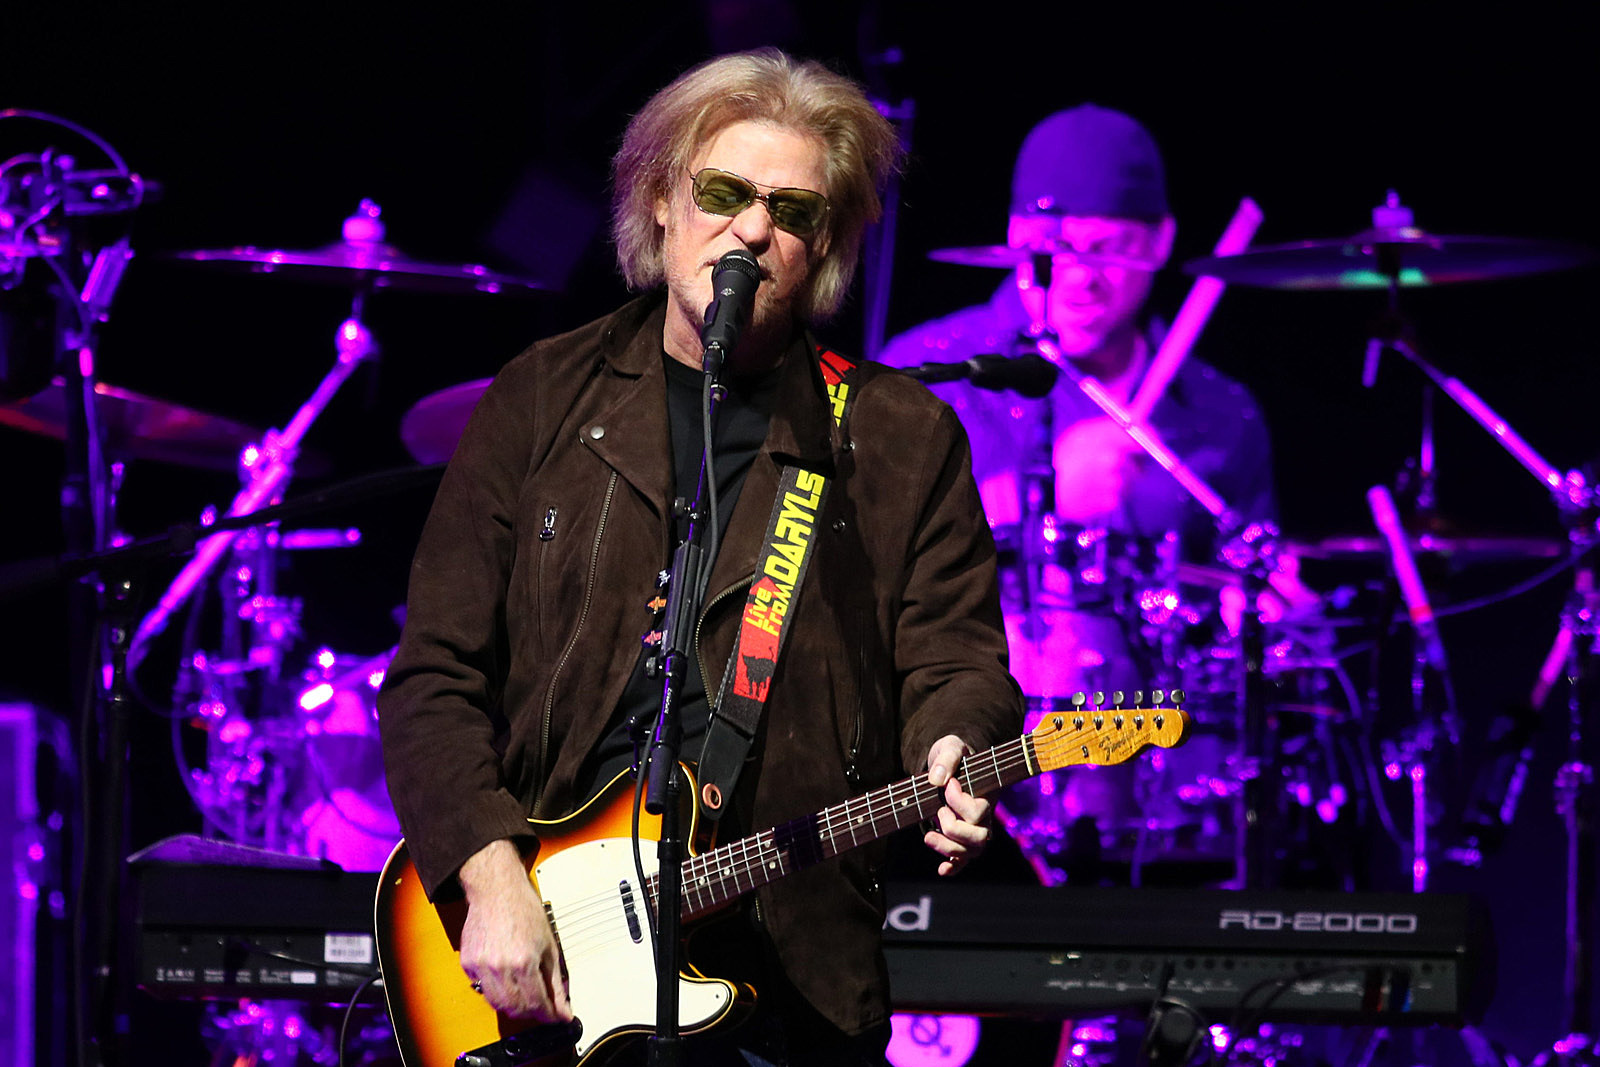 Daryl Hall Announces Spring 2022 U.S. Tour With Todd Rundgren